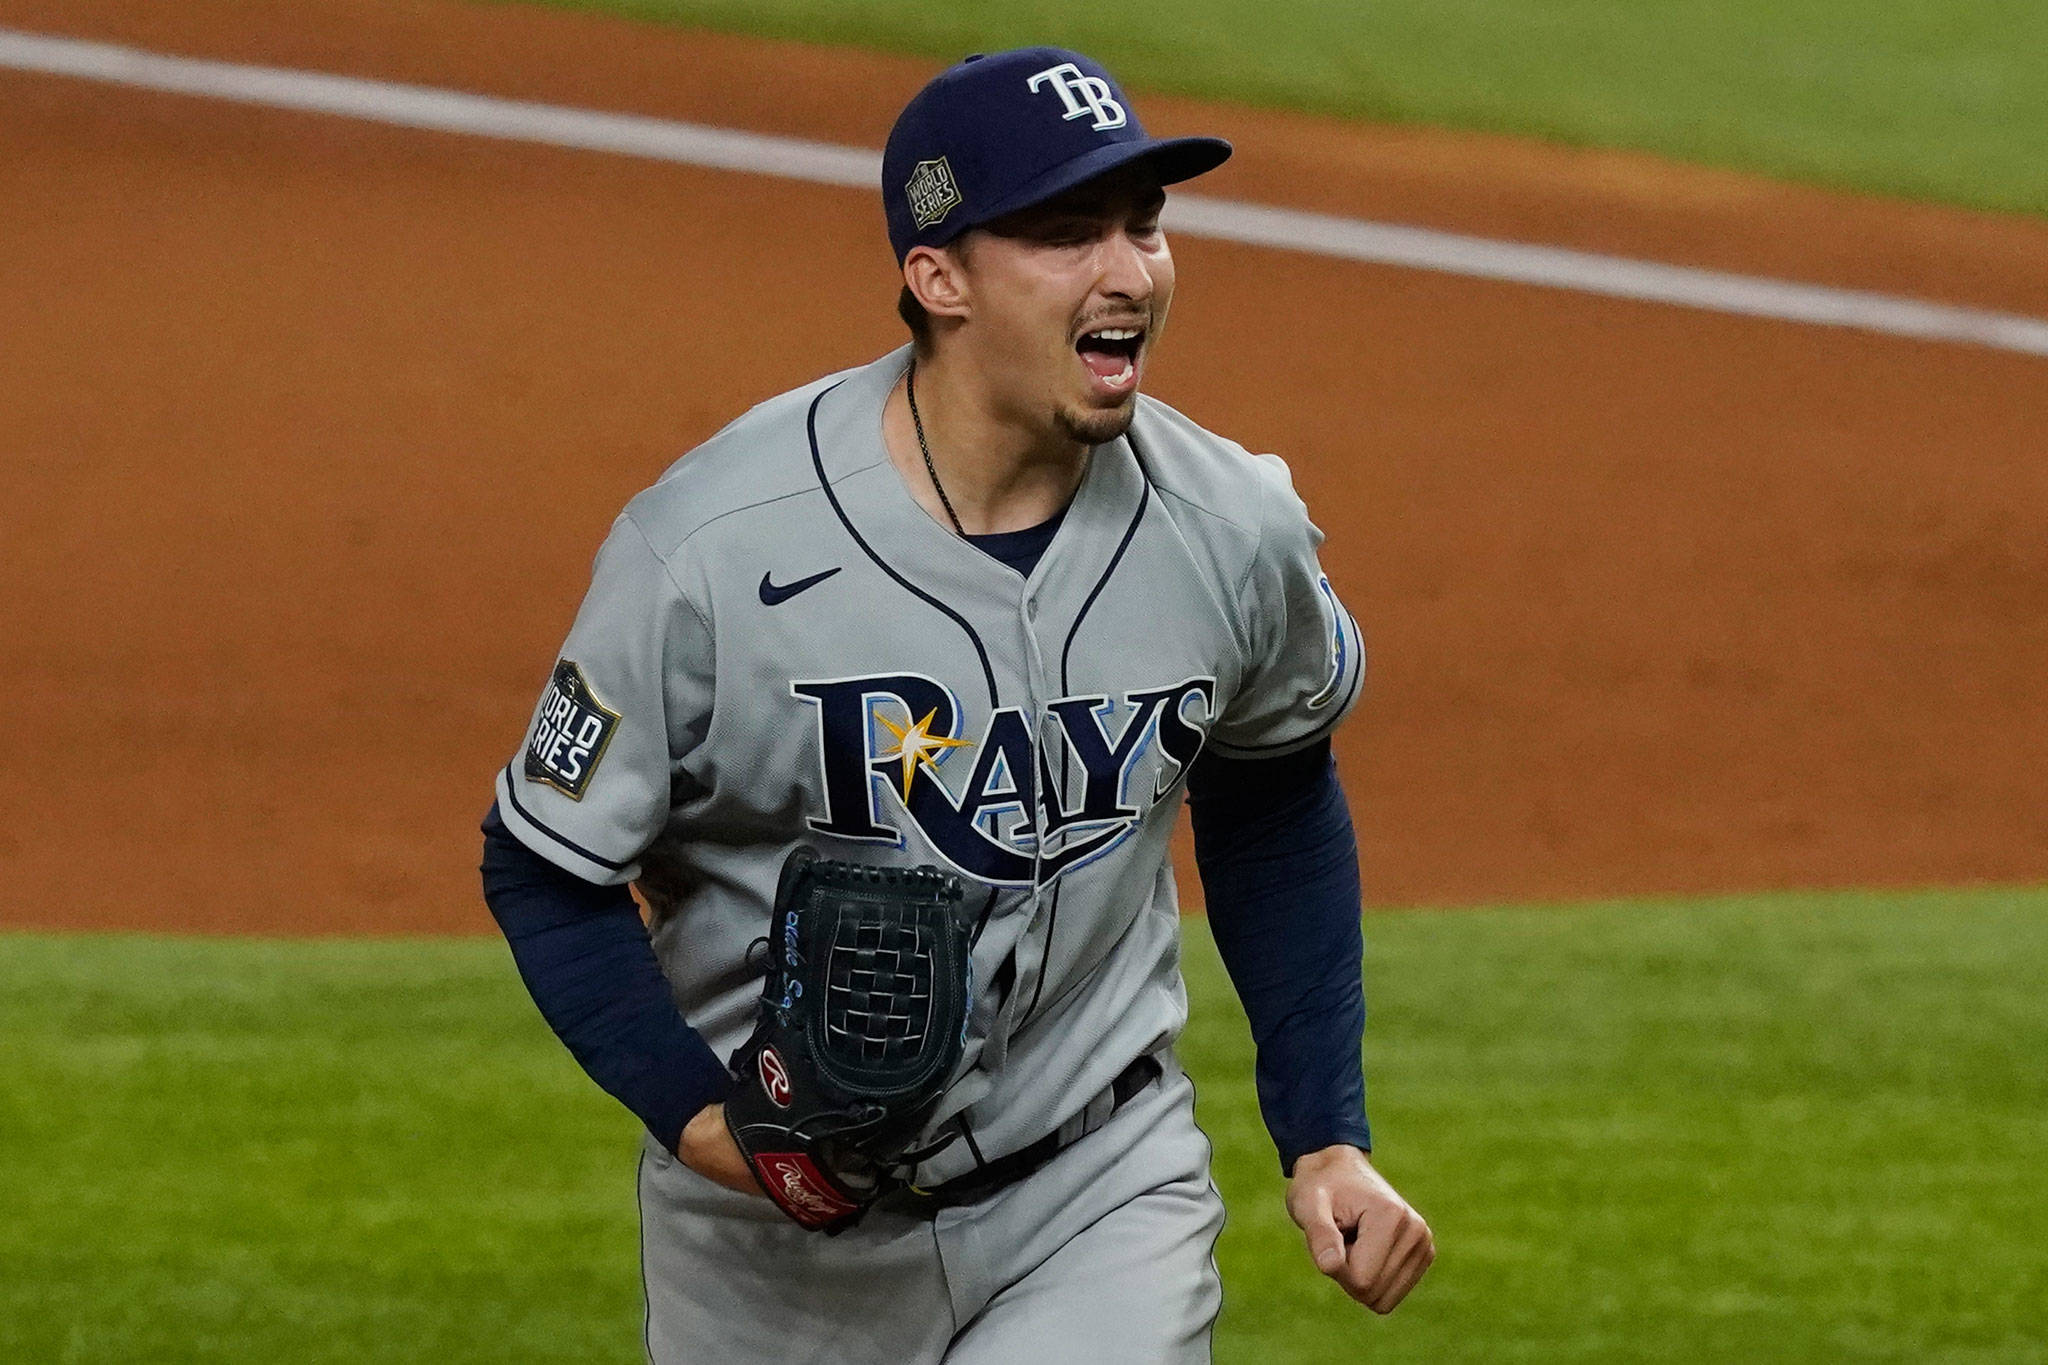 Rays starting pitcher Blake Snell, a Shorewood High School graduate, celebrates after striking out the side during the fourth inning of Game 6 of the World Series against the Dodgers on Oct. 27, 2020, in Arlington, Texas. (AP Photo/Tony Gutierrez)